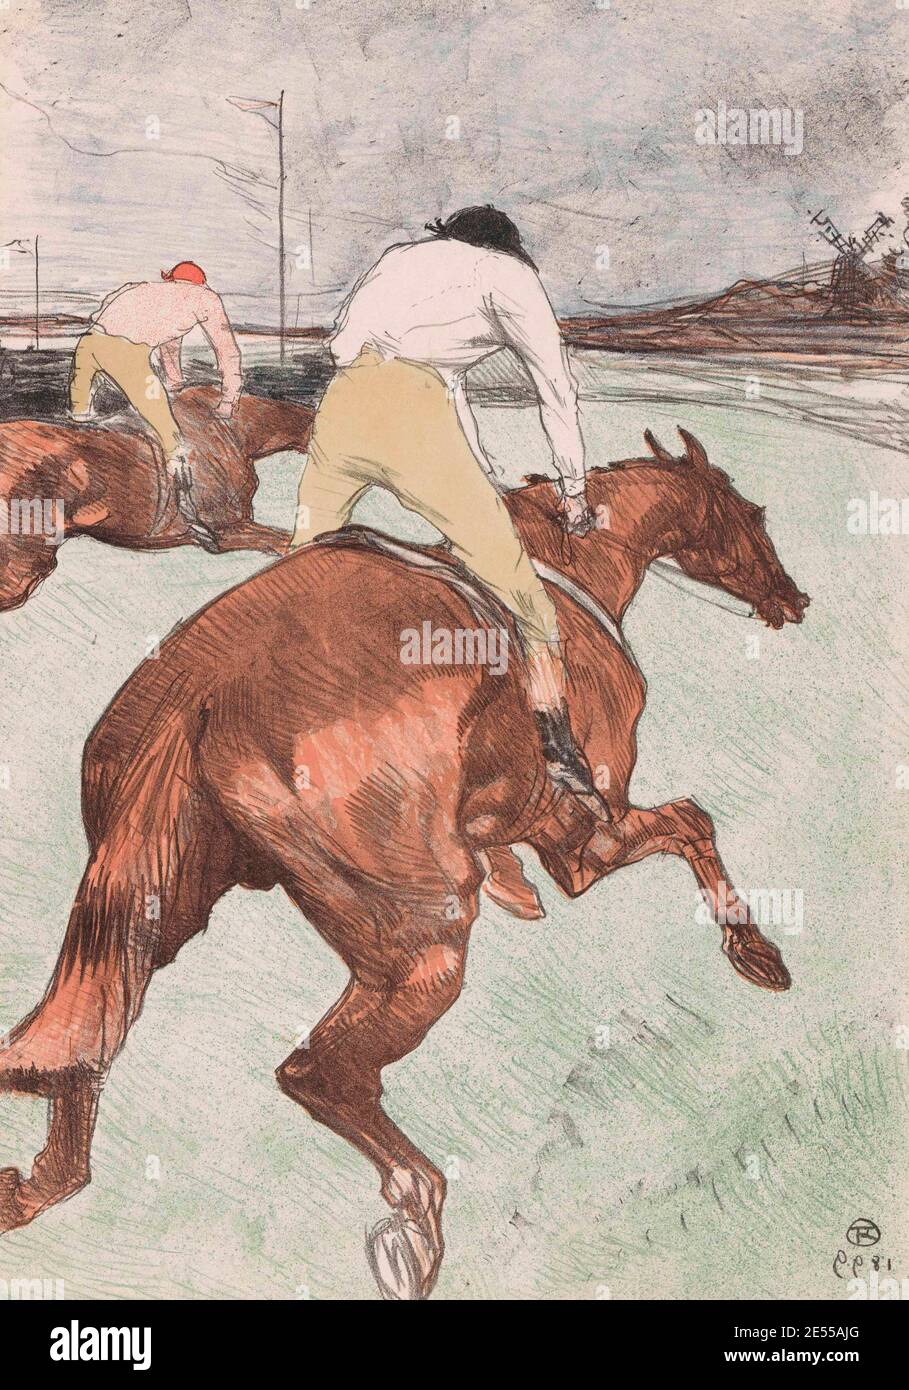 Le Jockey by Henri de Toulouse-Lautrec dating from 1899. Stock Photo